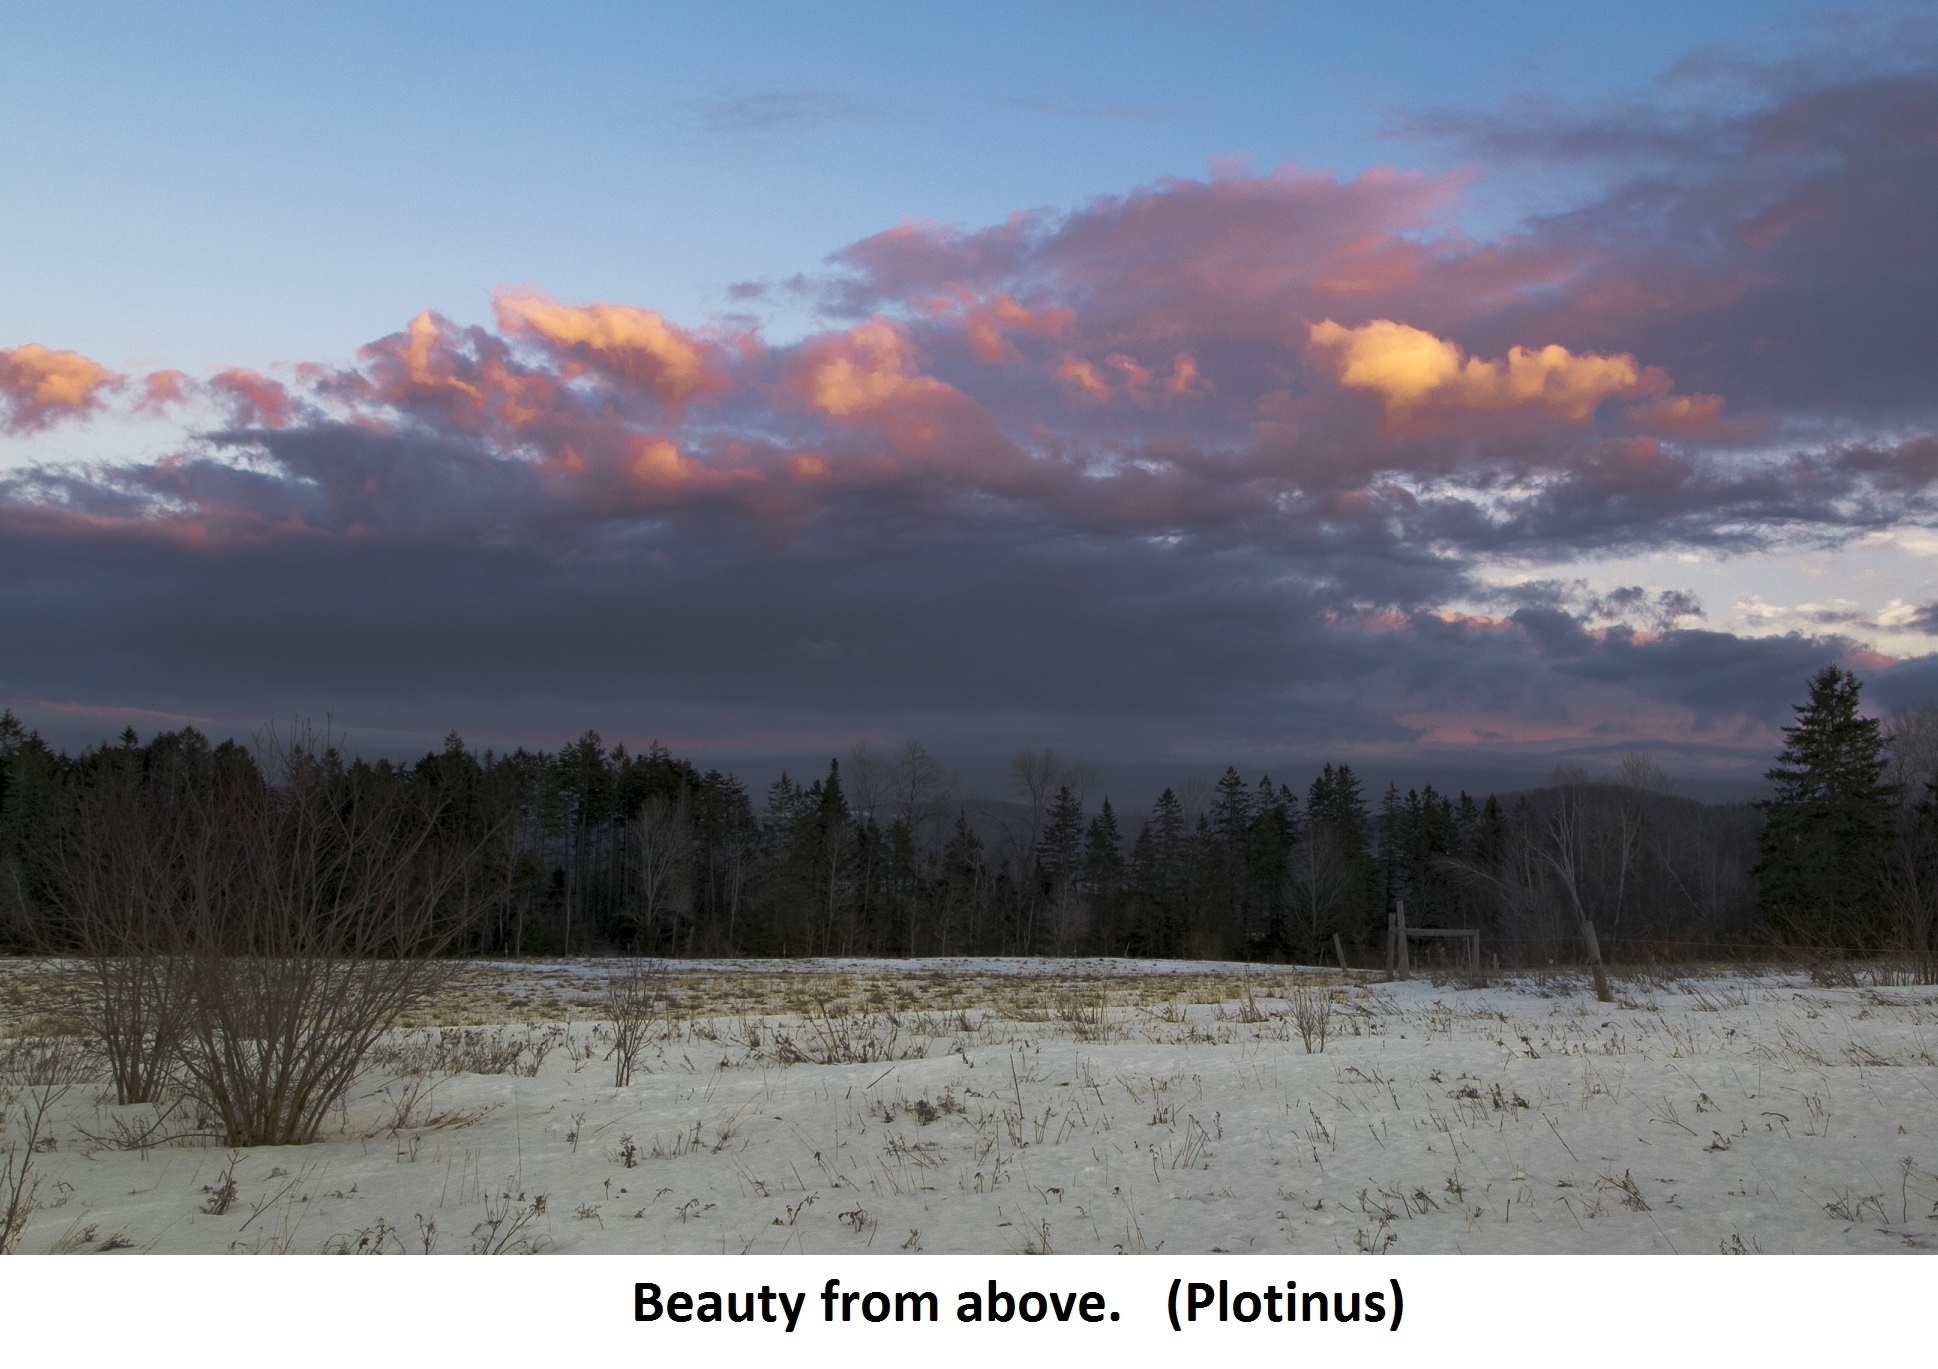 Beauty from above Plotinus